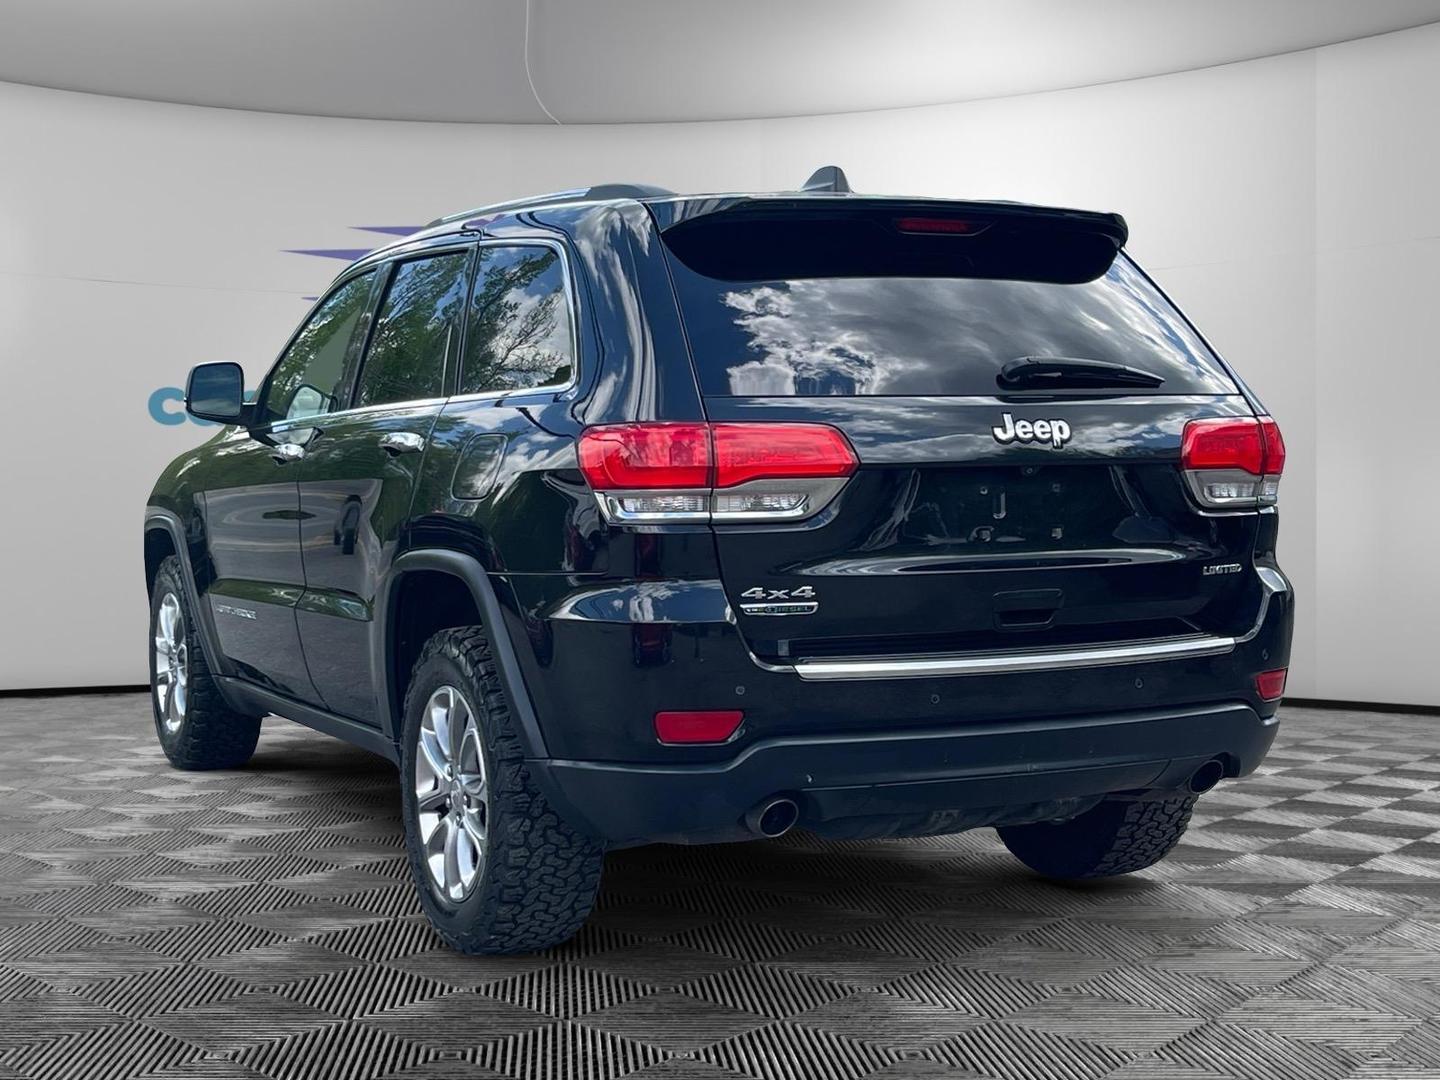 2015 Jeep Grand Cherokee Utility 4d Limited 4wd 3.0l V6 T-diesel - Image 3